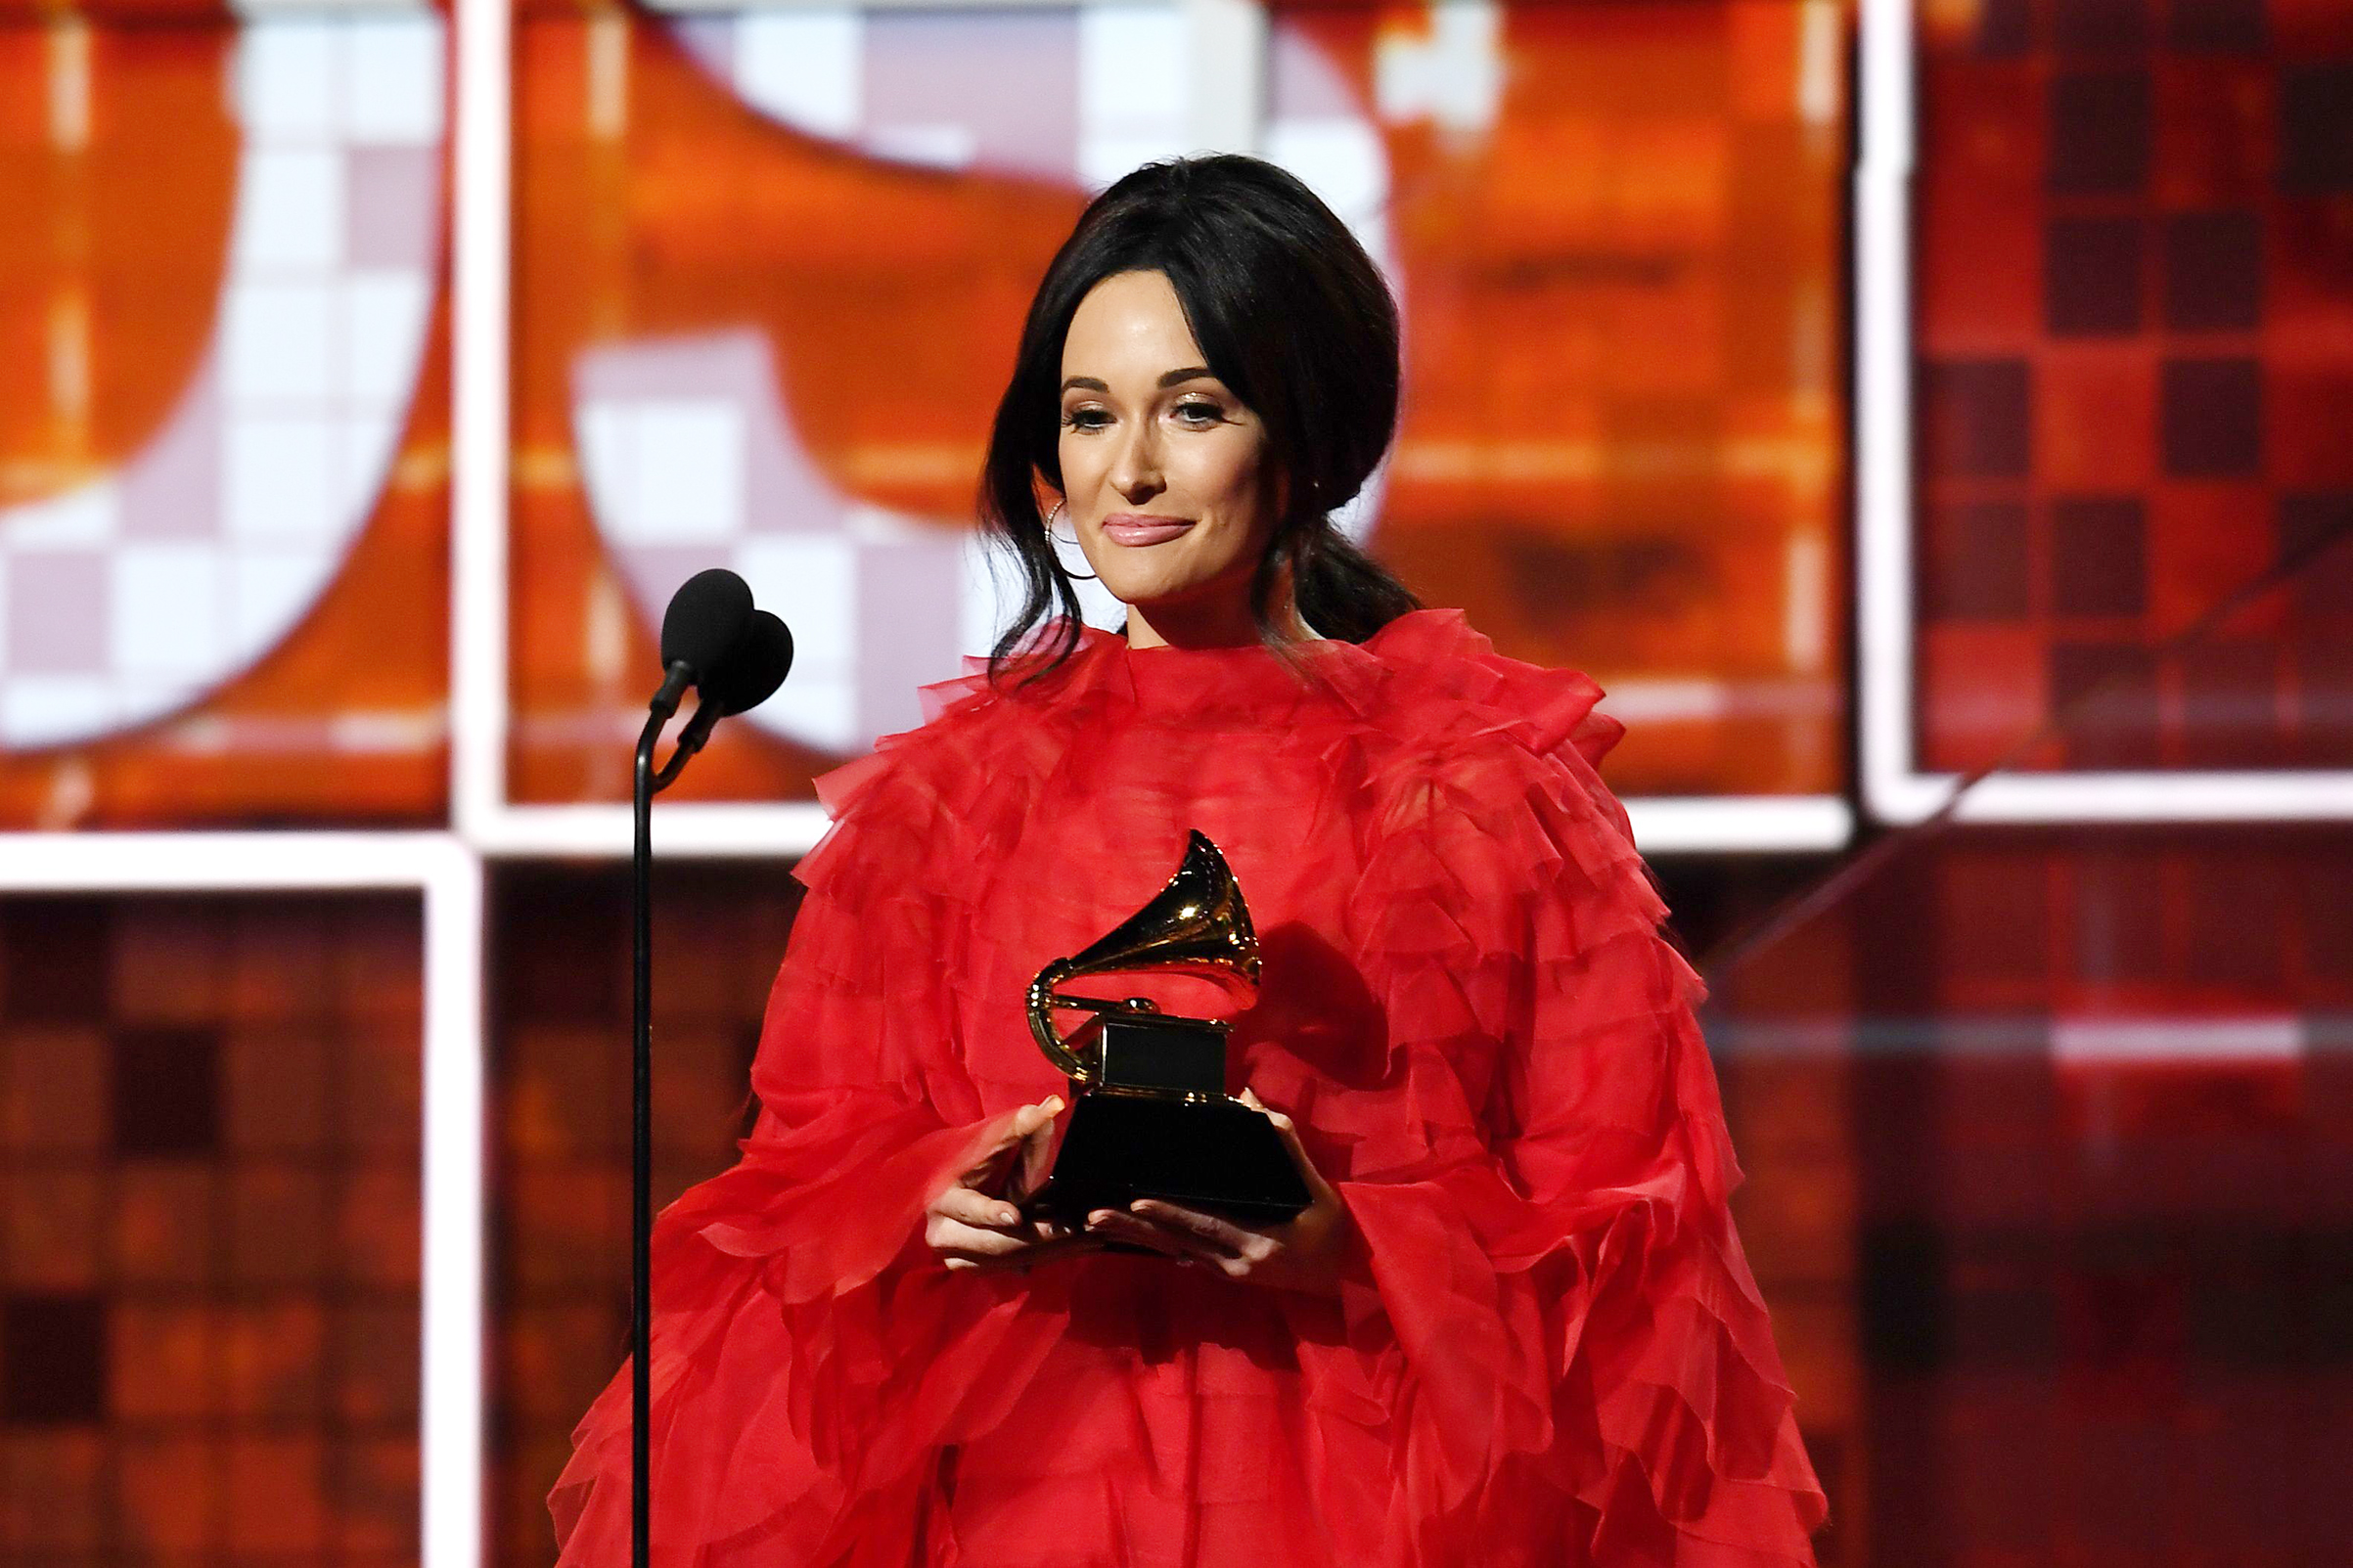 Kacey Musgraves accepts the award for Best Country Album with "Golden Hour" during the 61st Annual Grammy Awards on Feb. 10, 2019, in Los Angeles. (Robyn BECK—AFP/Getty Images)